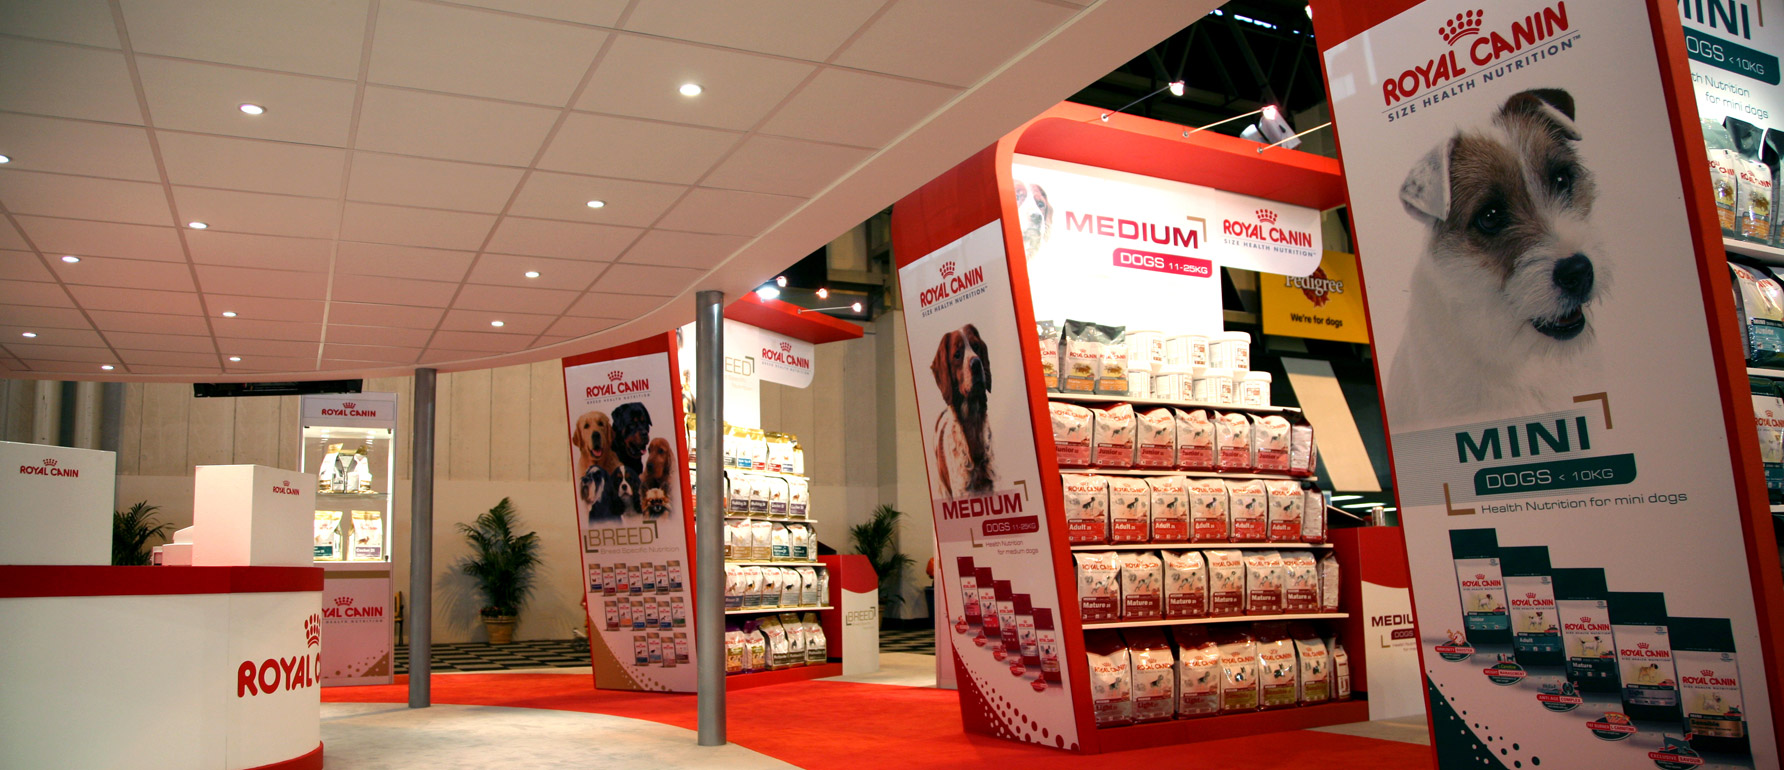 Photograph of Royal Canin's exhibition stand at Crufts.